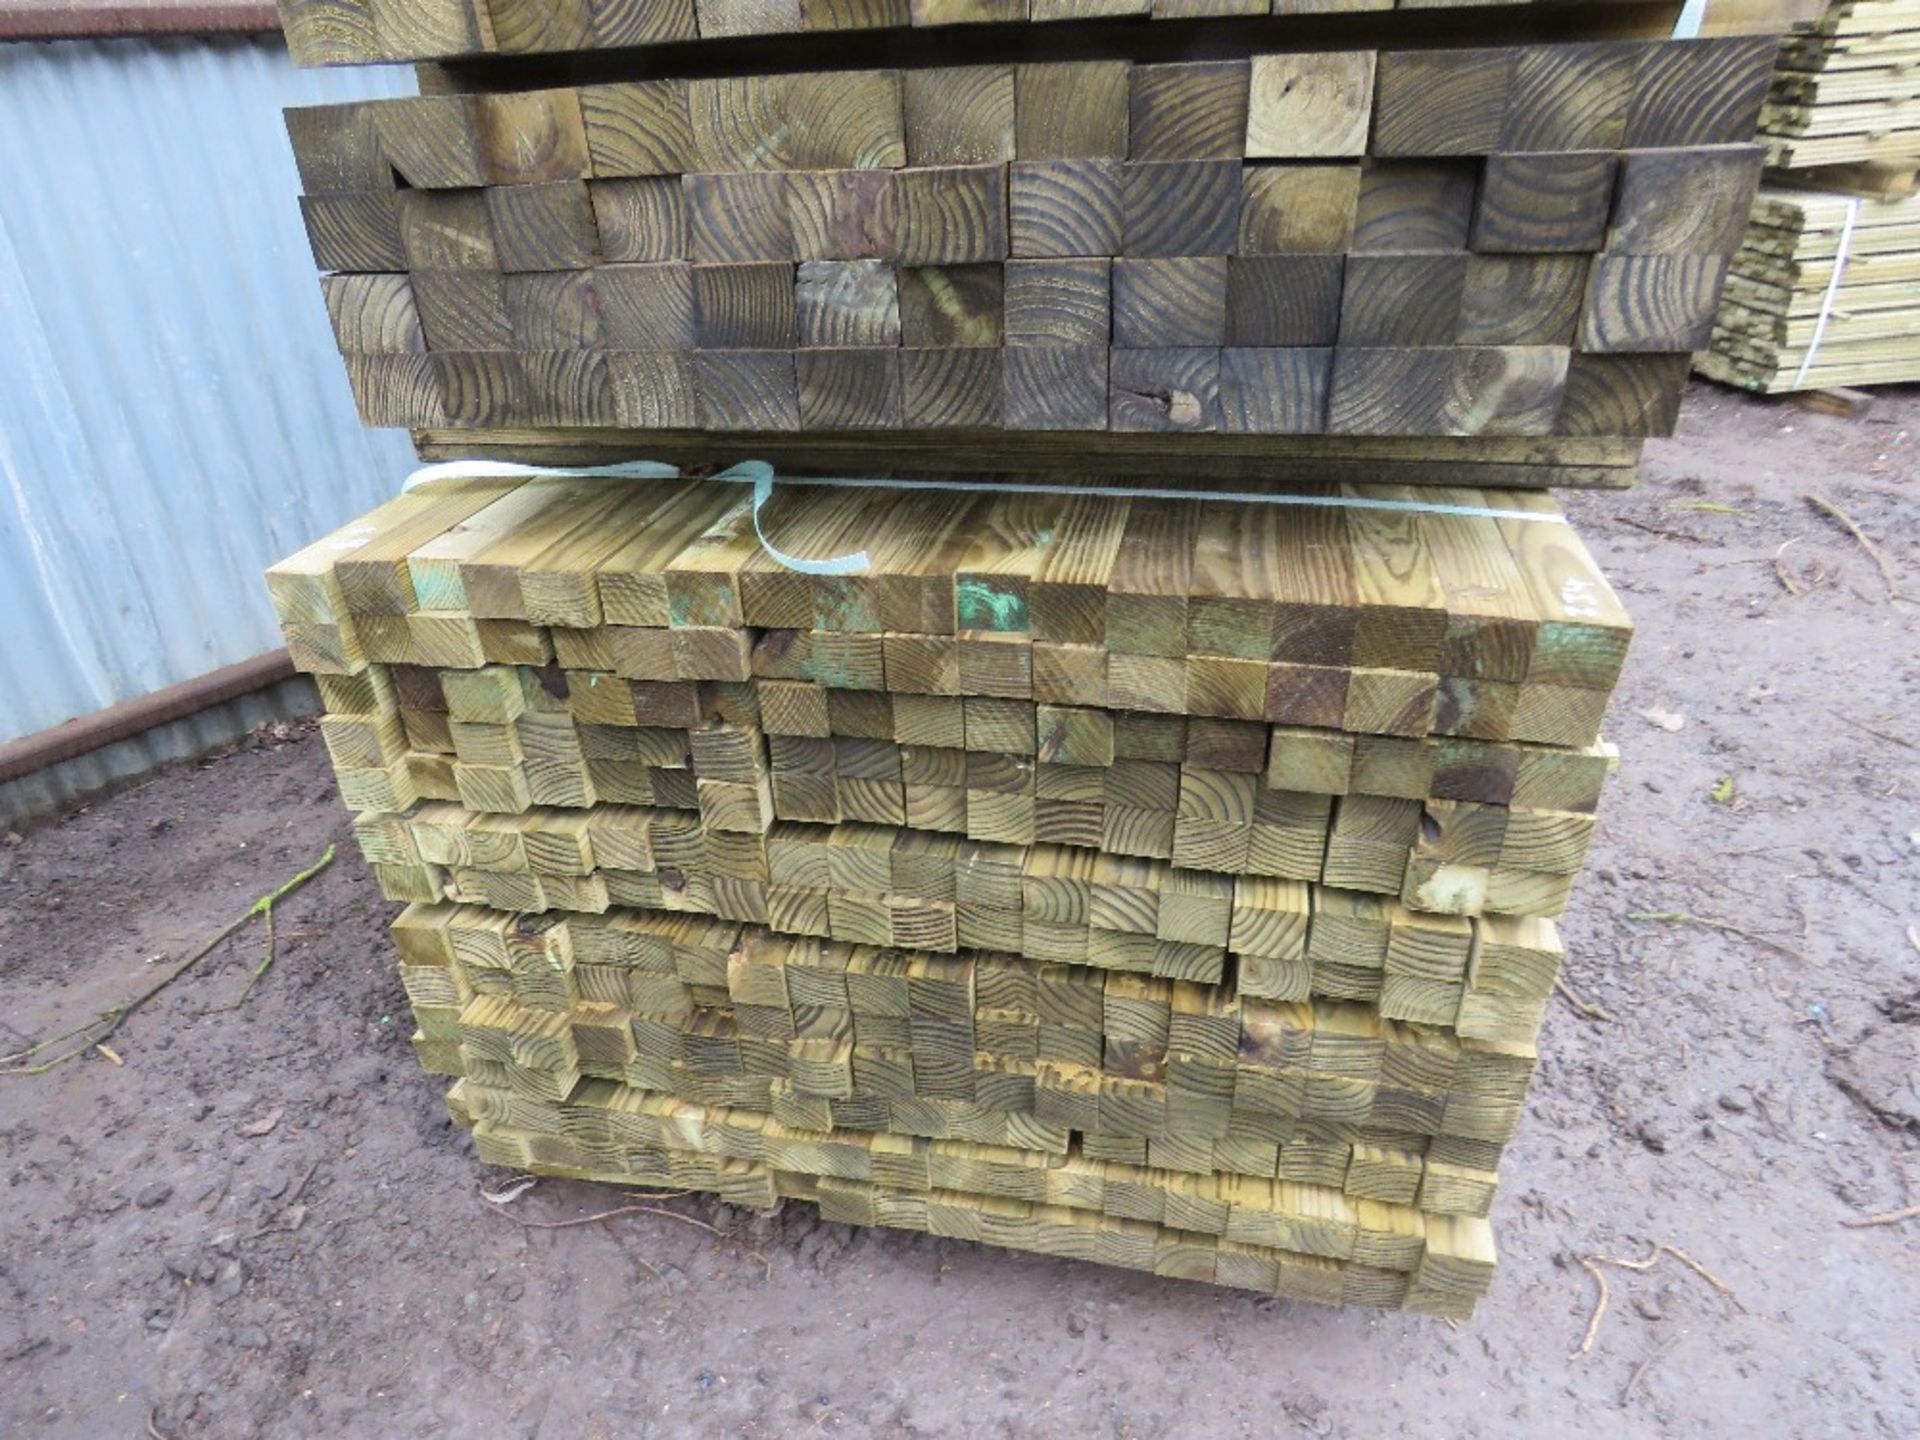 2 LARGE PACKS OF TIMBER POSTS APPROX. 372 1.8MX5.5CM - Image 3 of 3